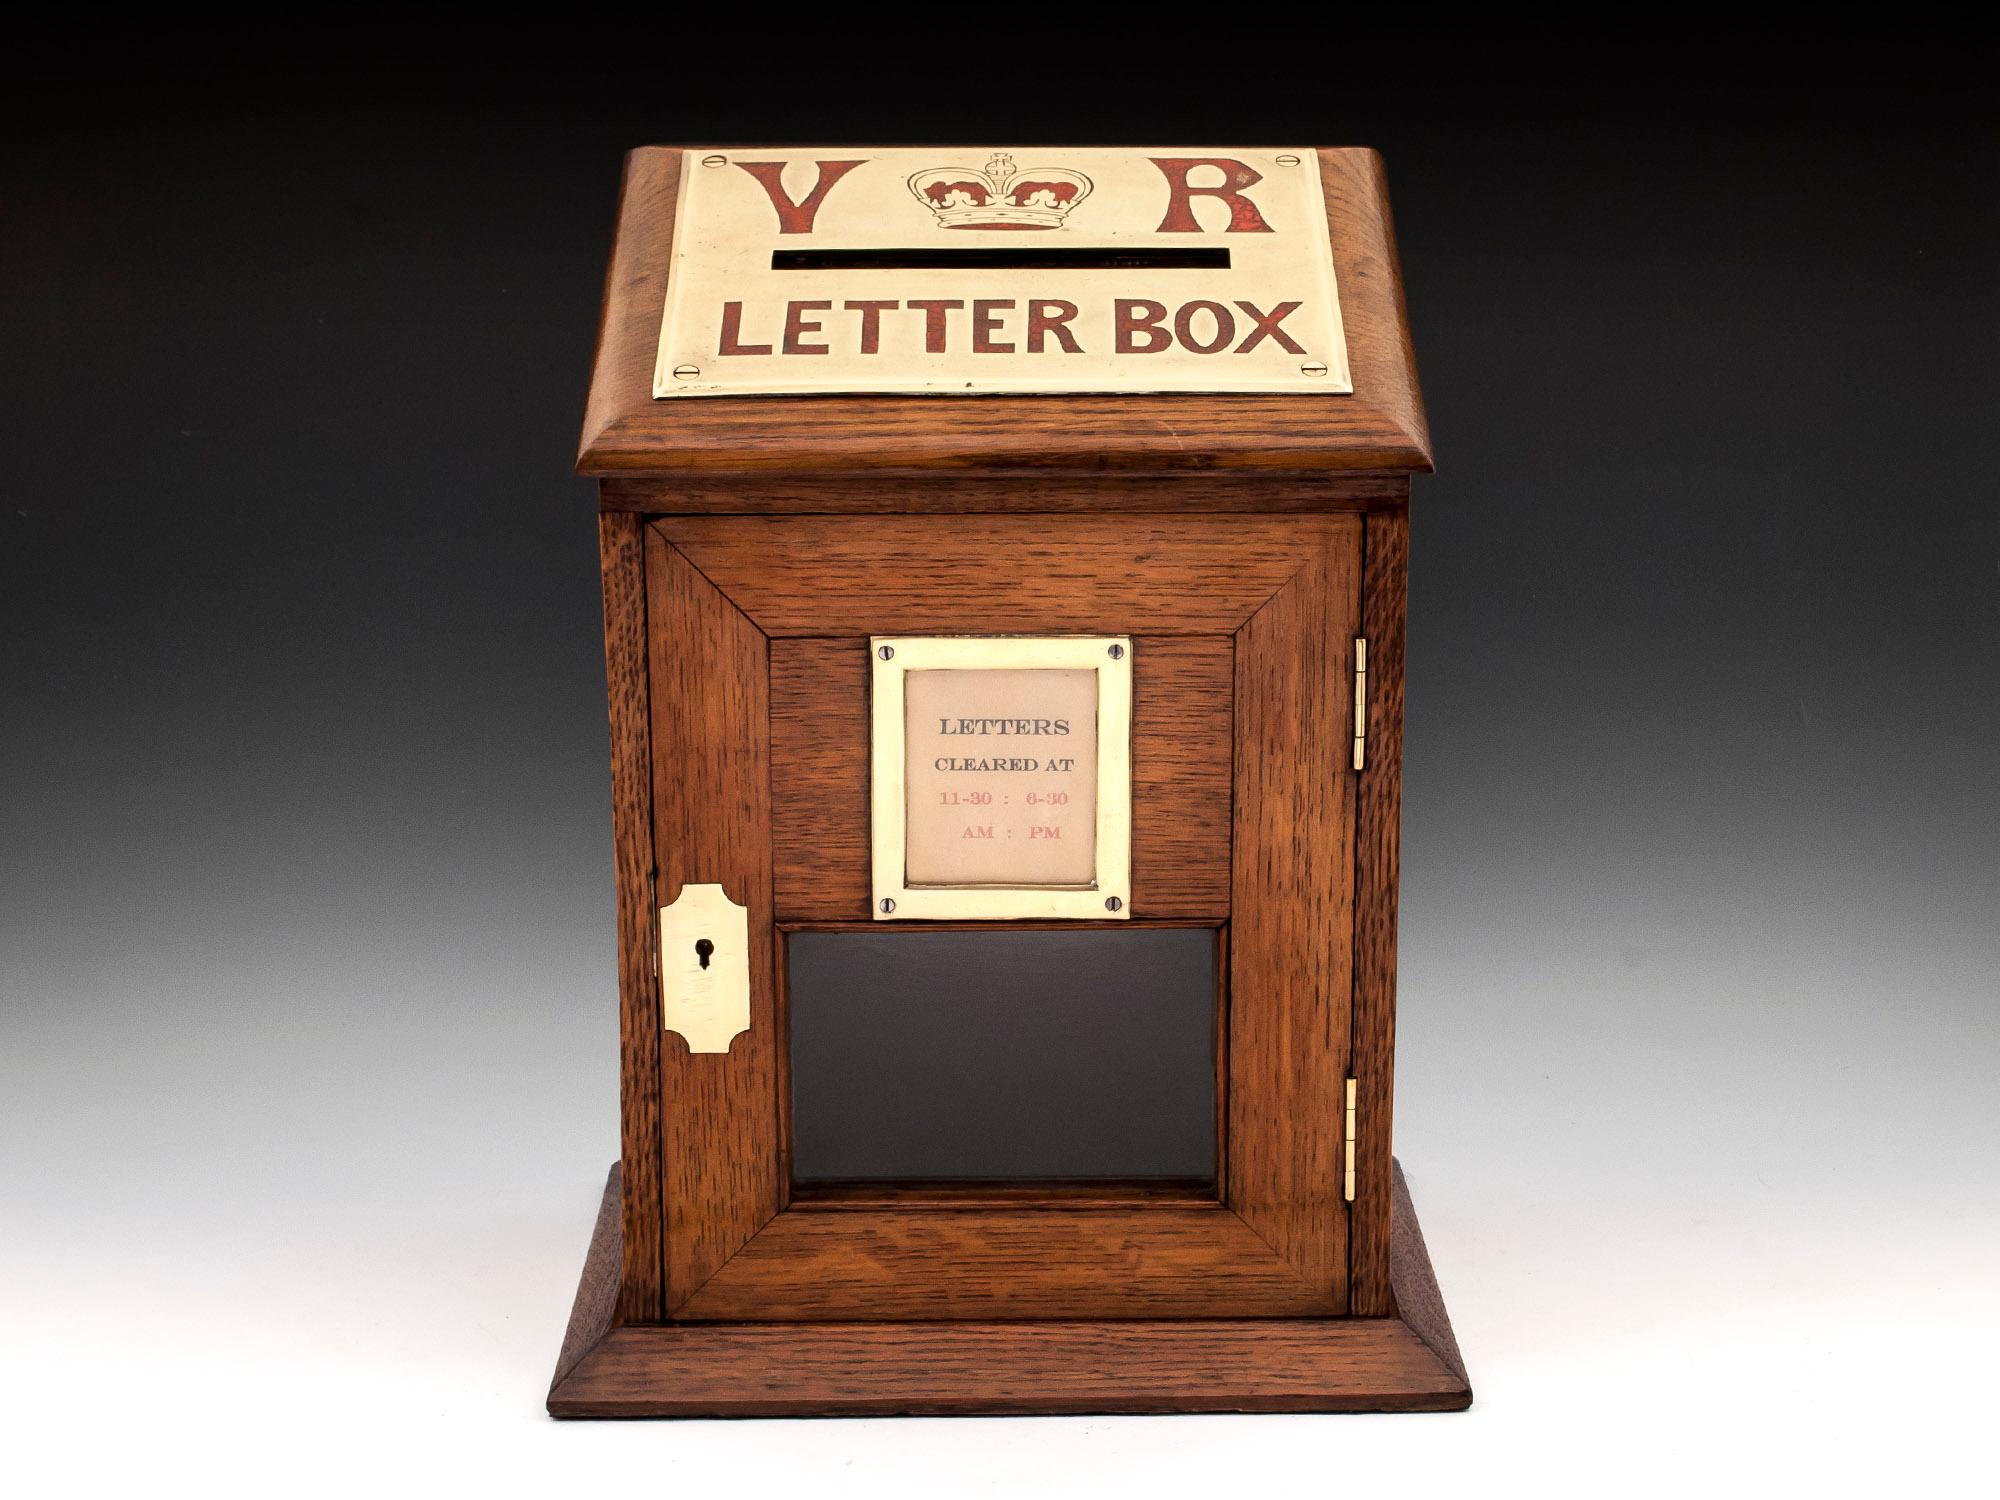 Country house letter box made of solid oak with an engraved brass letter slot with red letters V & R (Victoria Regina) with a crown of Queen Victoria and the words 